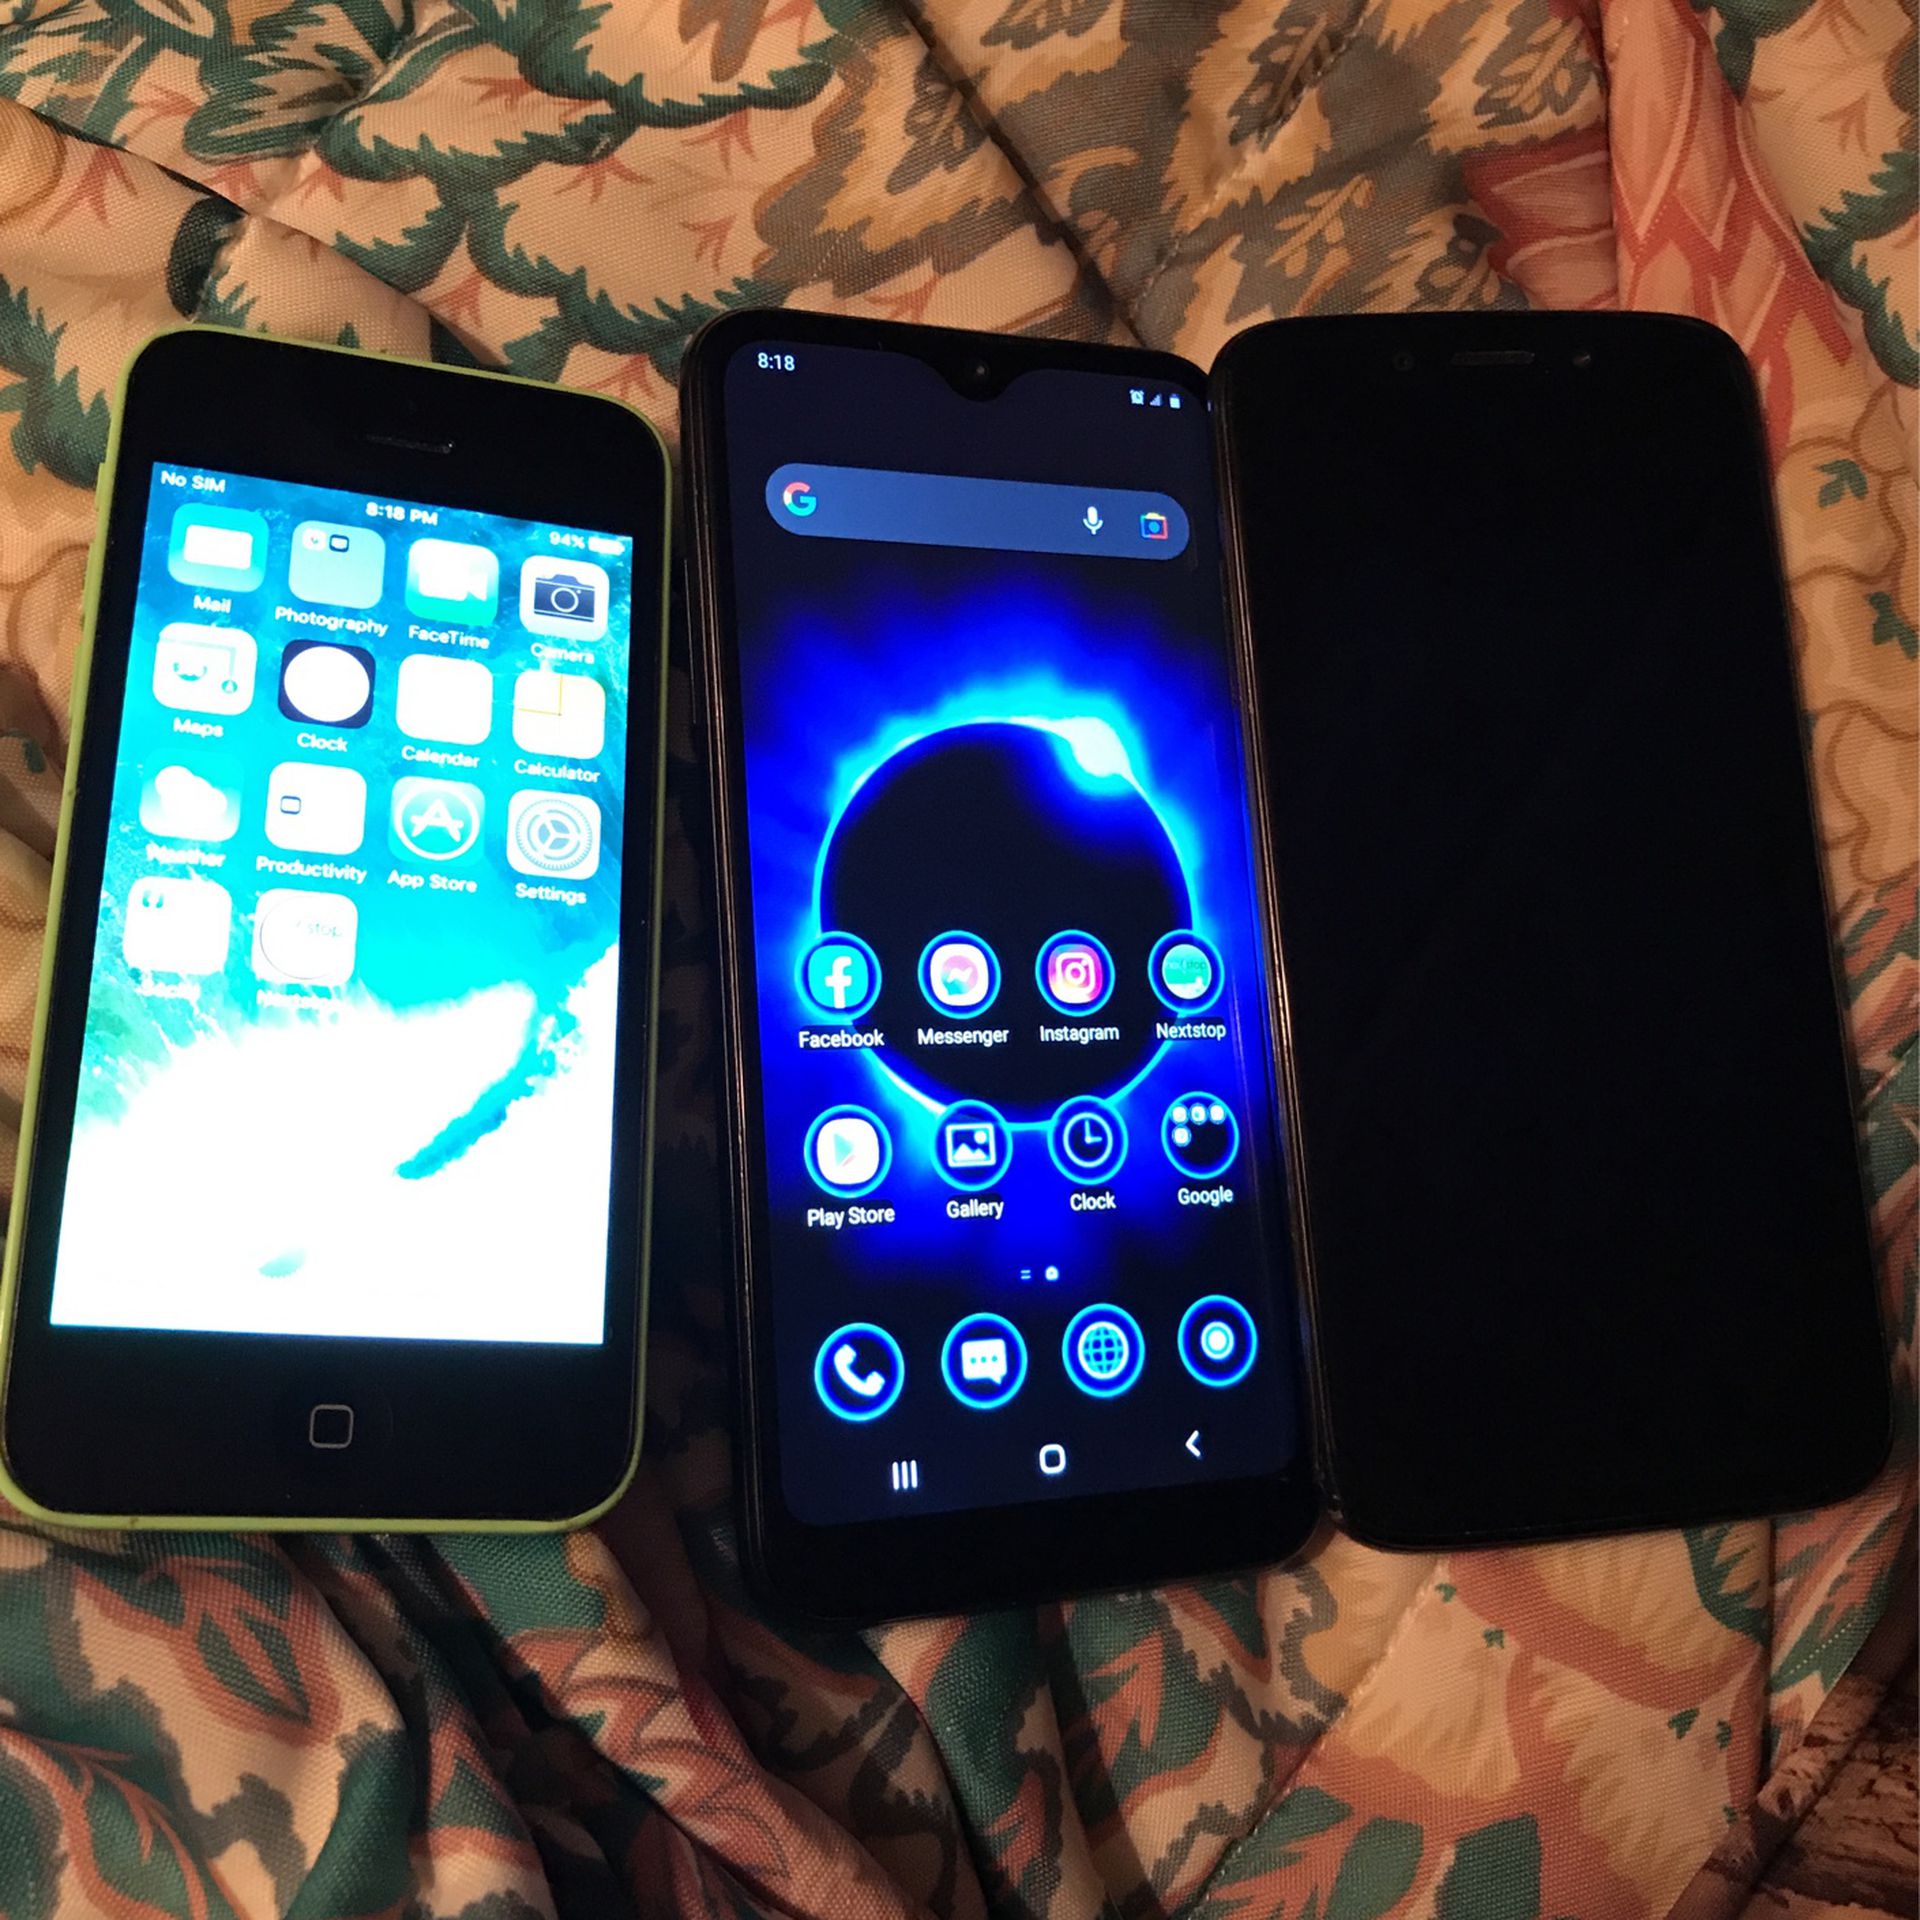 Unlocked iPhone 5c, And Two Straight Talk Phones